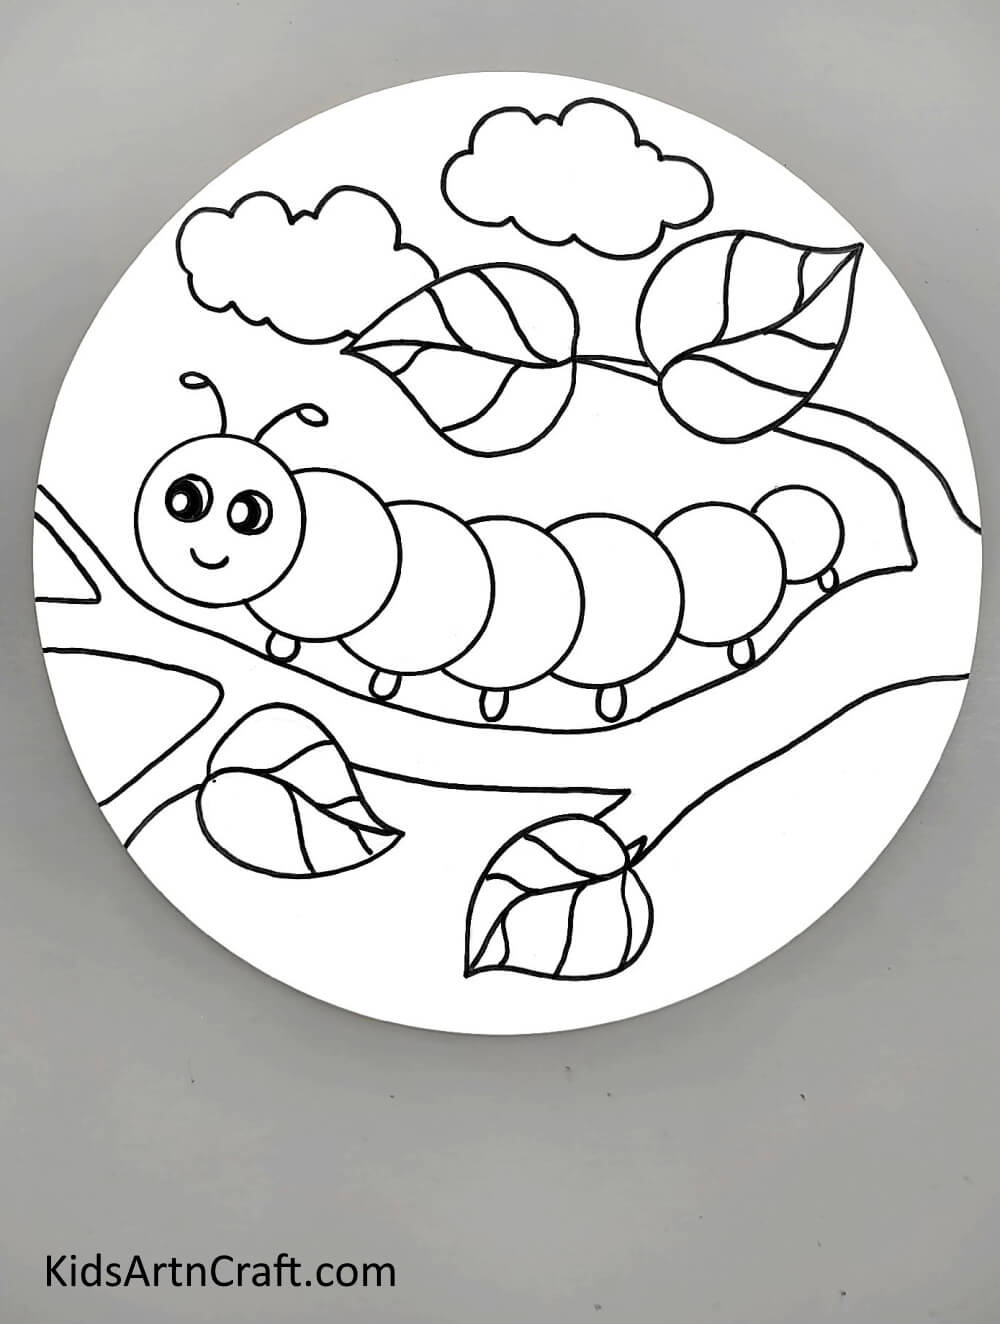 Drawing The Branch And The Sky Kids: Here's How to Draw a Worm